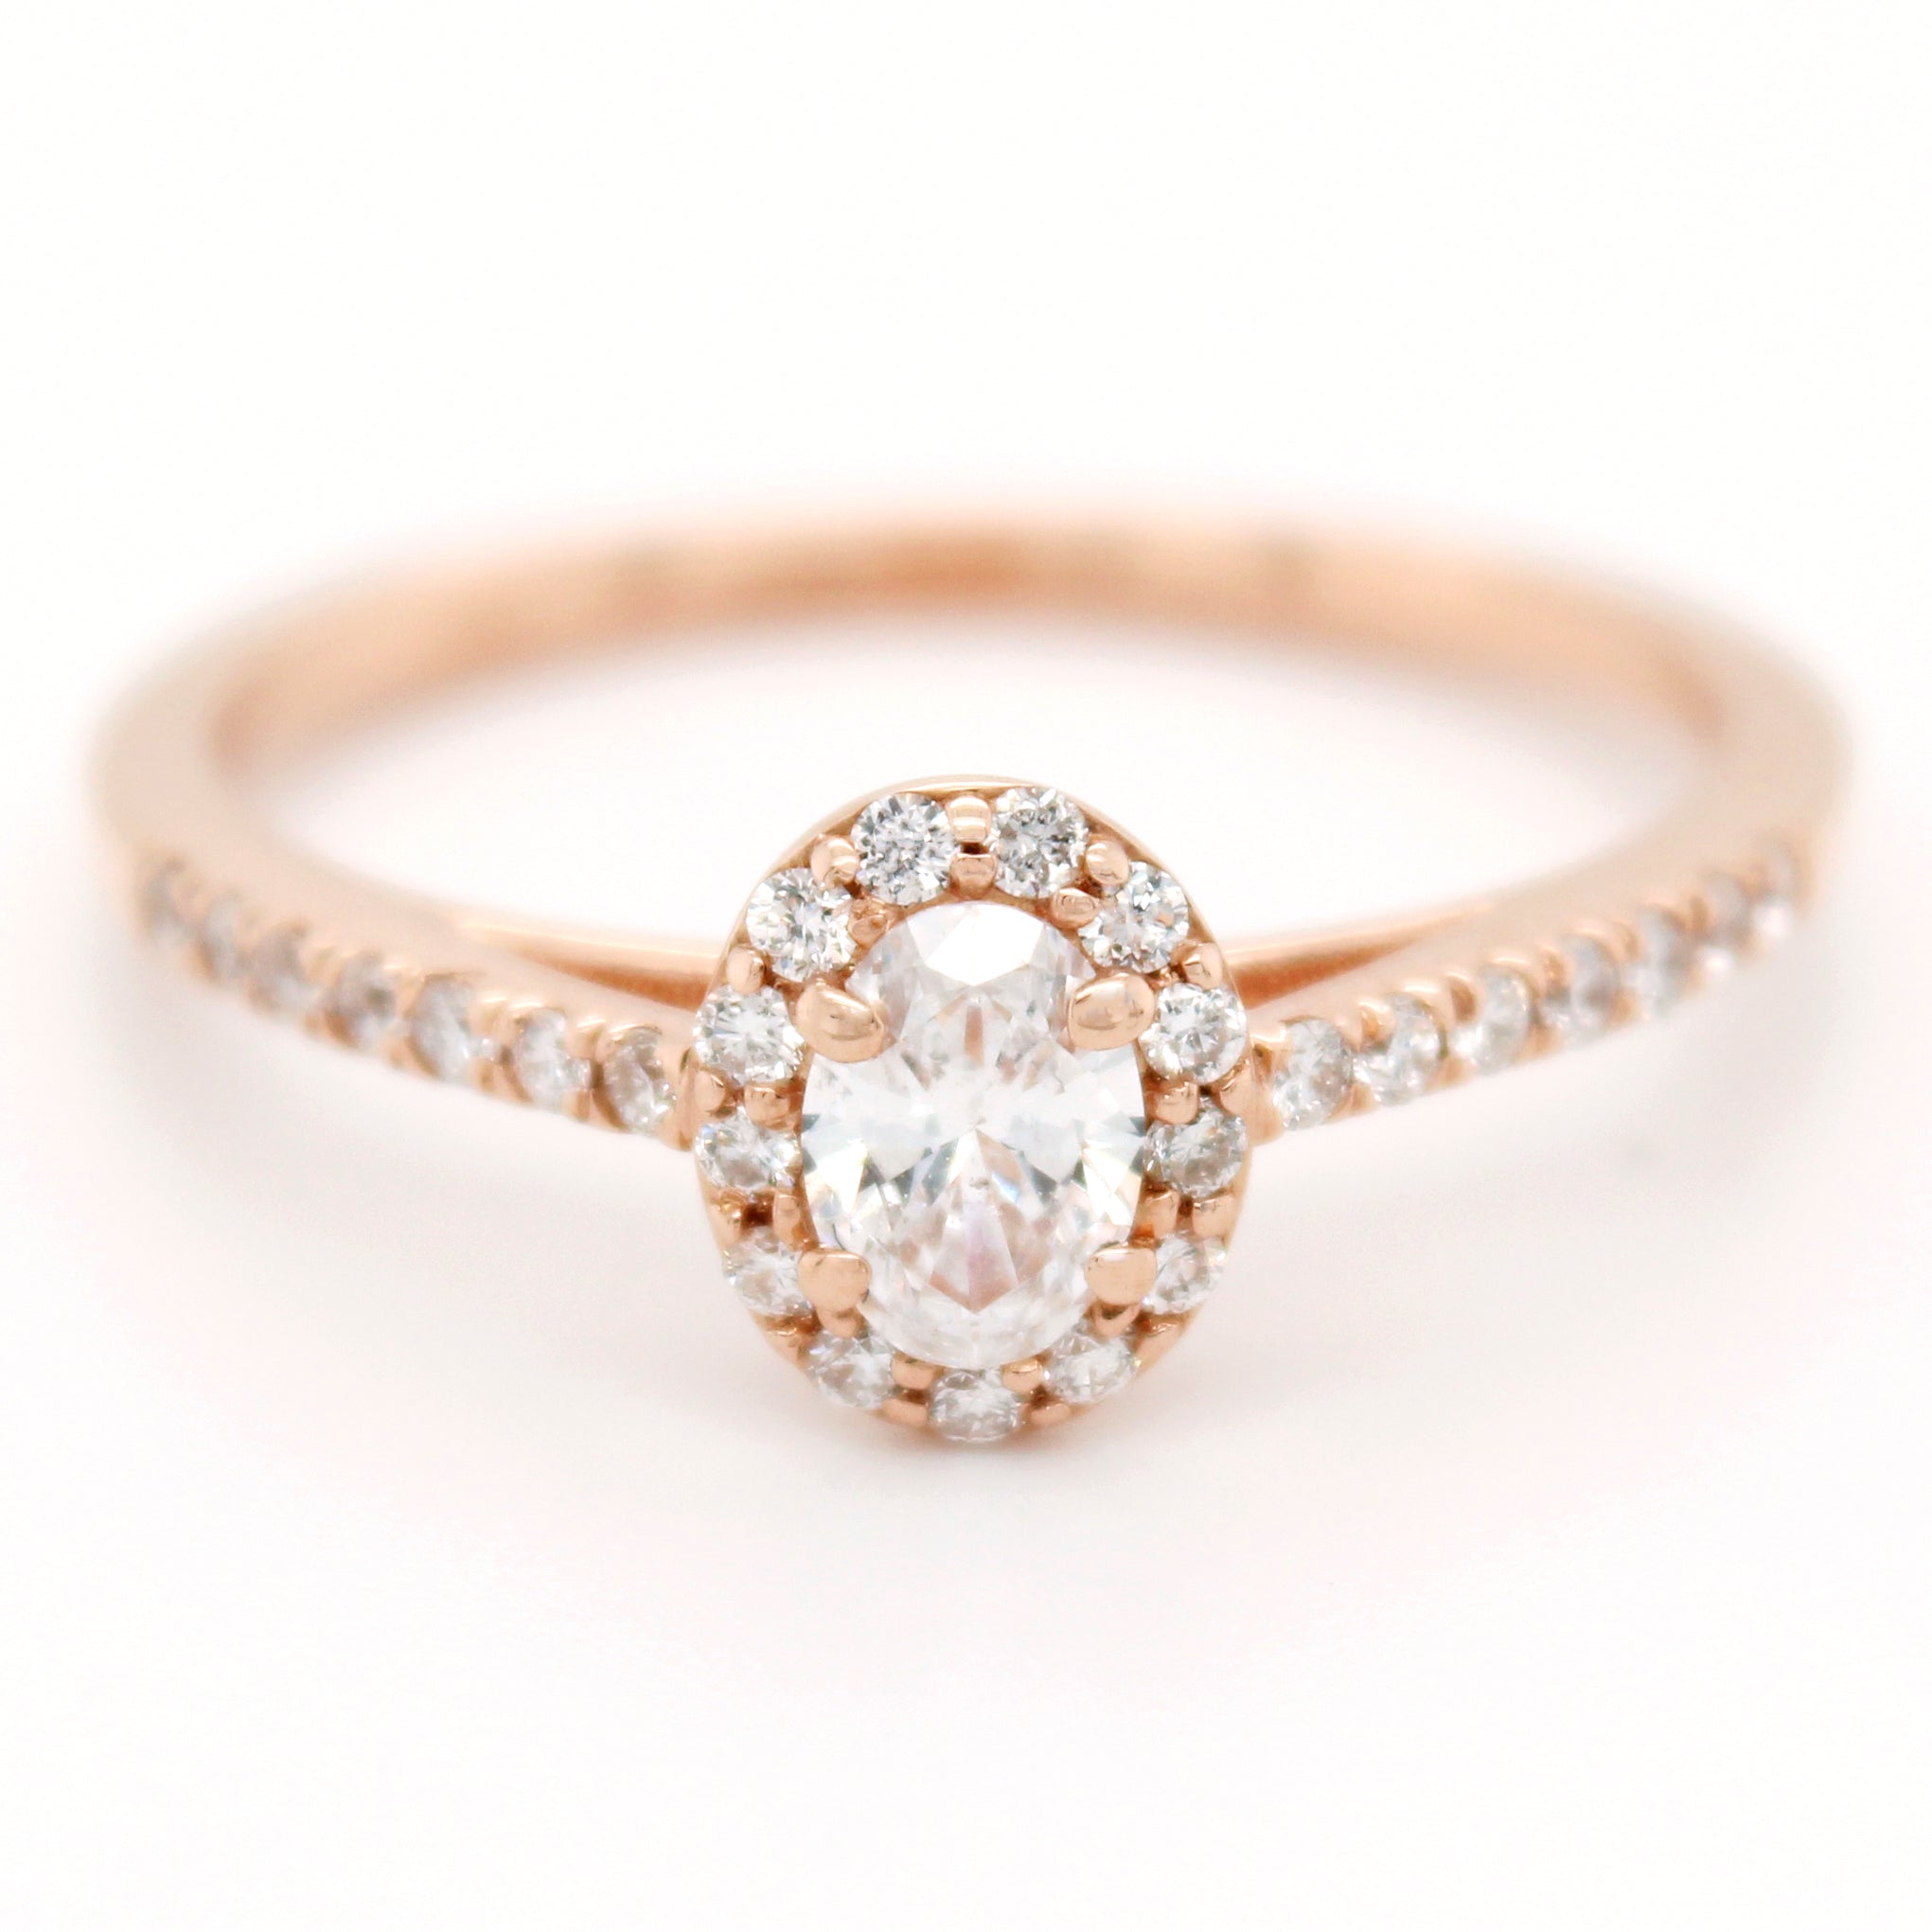 Vintage 0.60ctw Sparkling Diamond Oval Halo Ring in 14k Rose Gold | Size 7.50